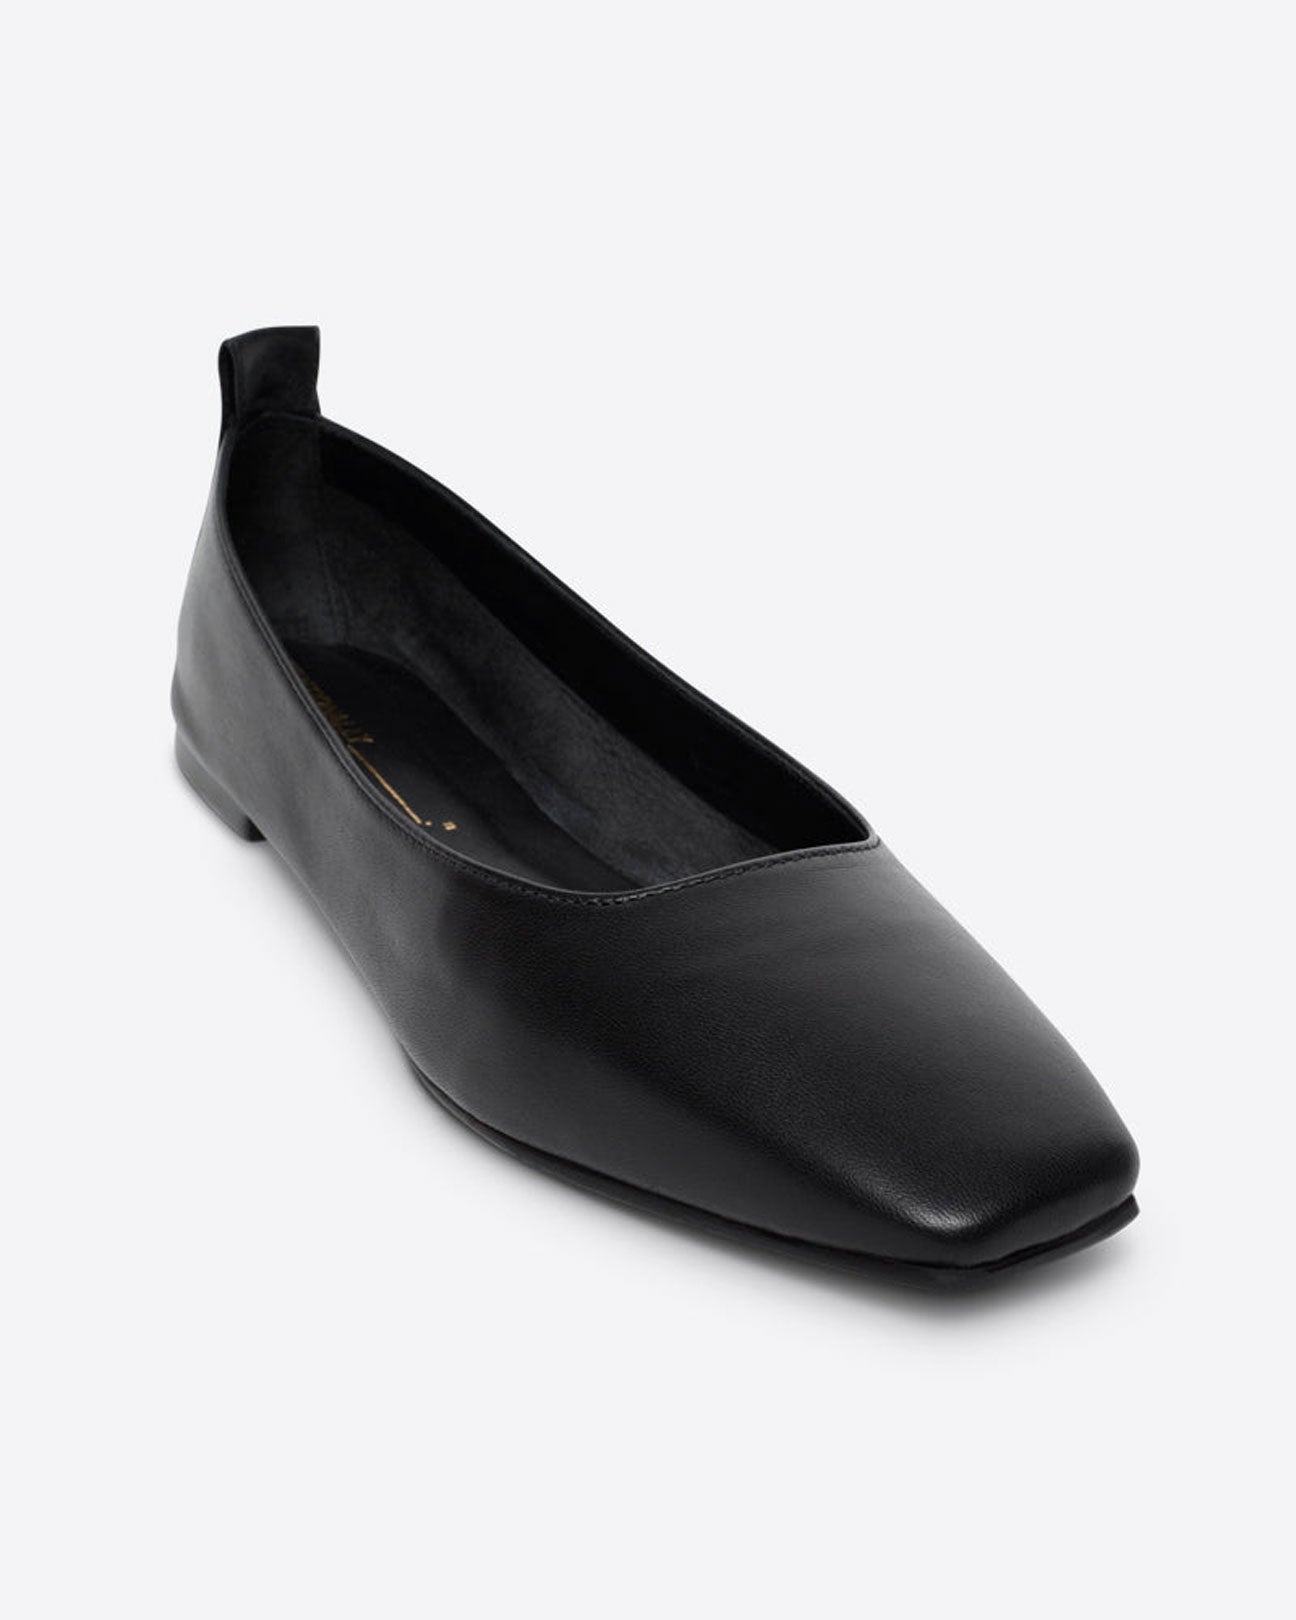 INTENTIONALLY BLANK Image Natural Sole Flat in Black available at Lahn.shop